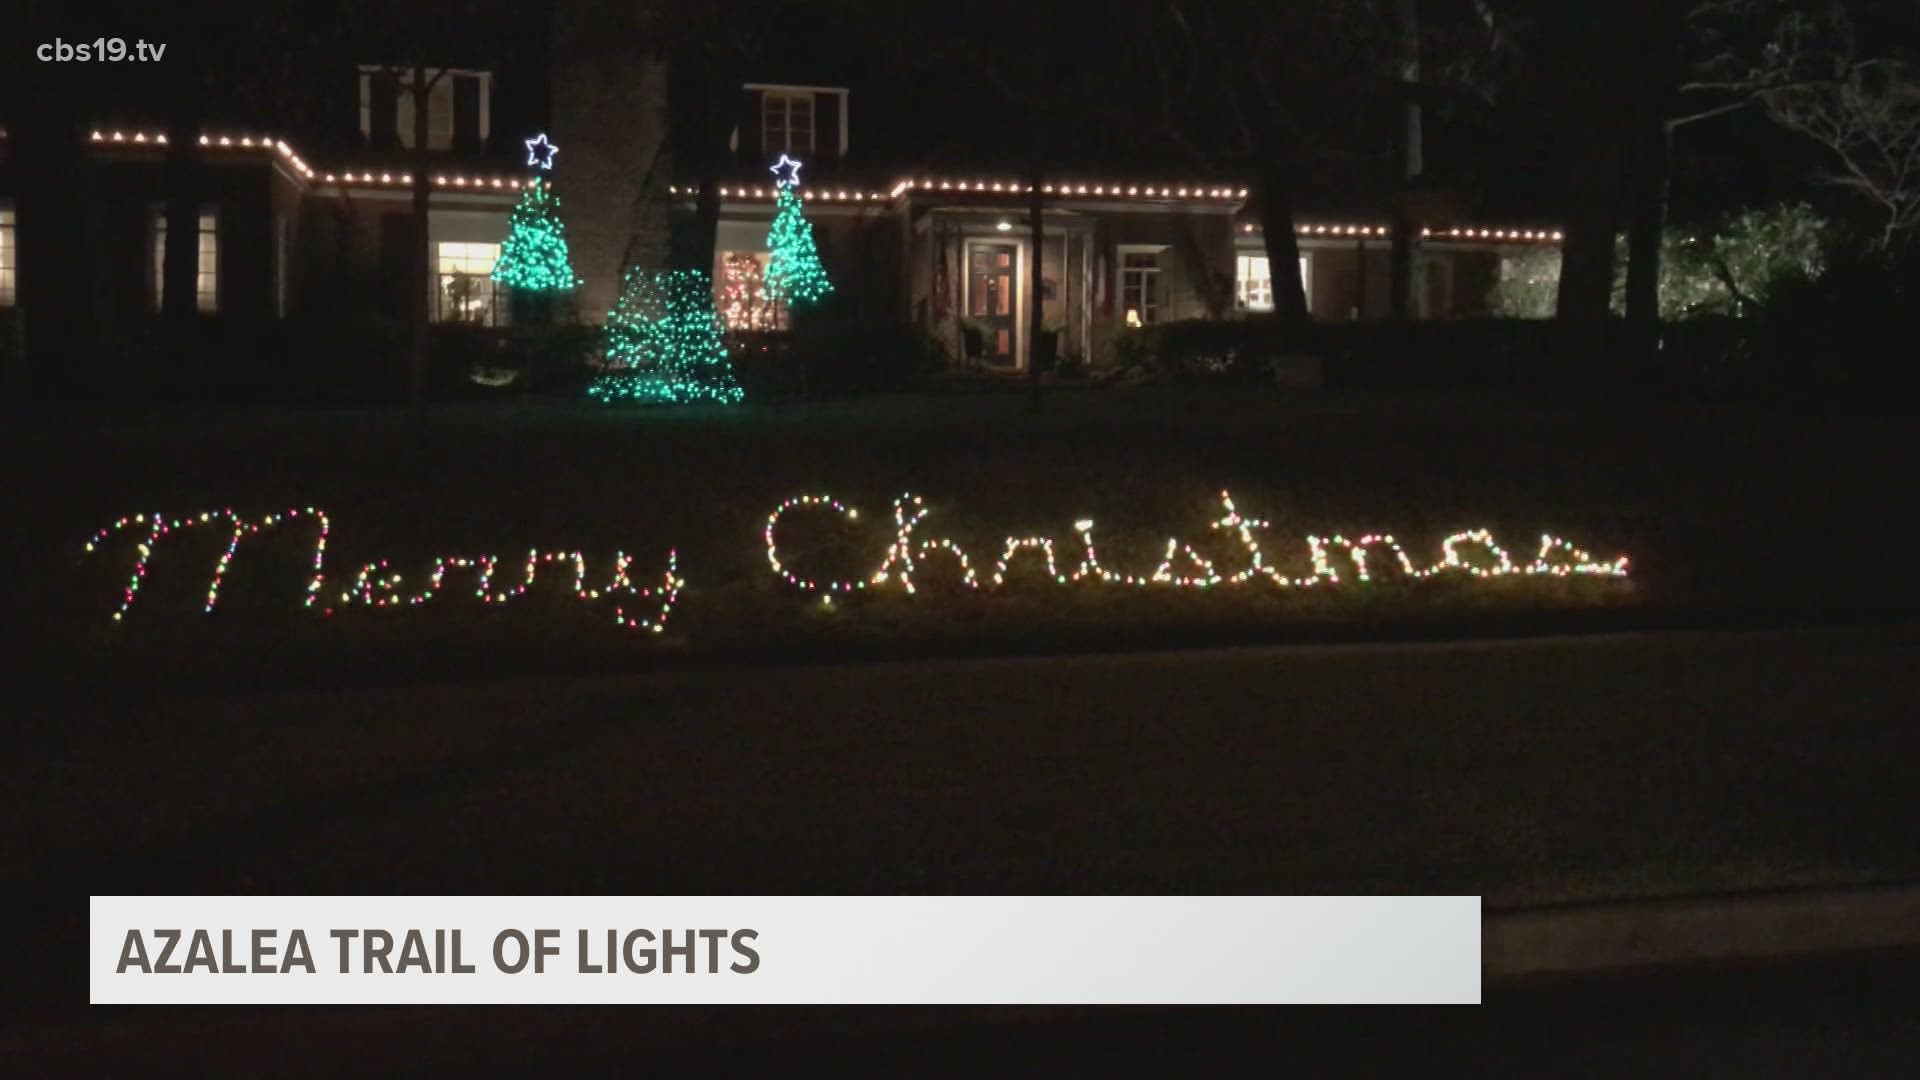 The event is in its fourth year and has grown every year with more people decorating their homes.